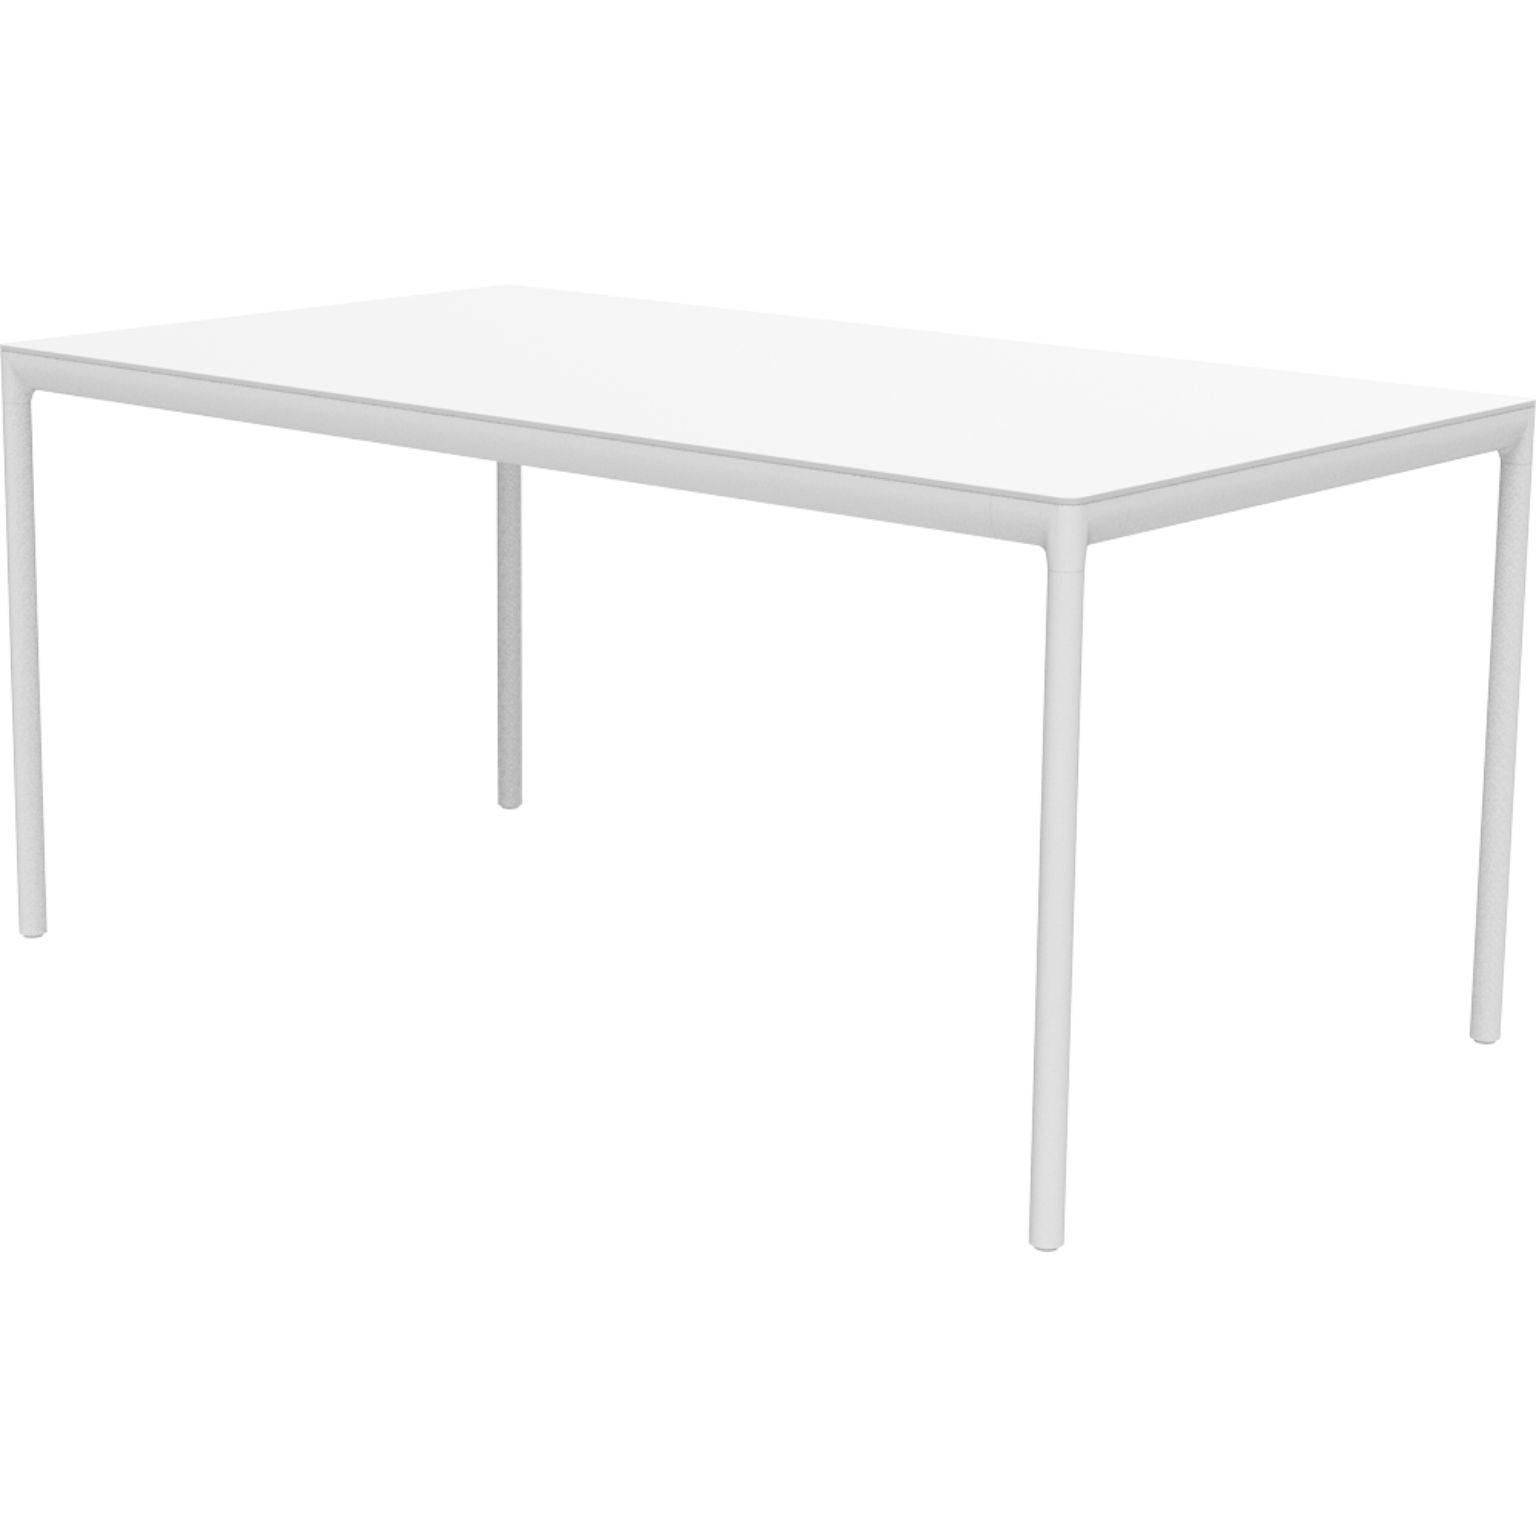 Ribbons White 160 Coffee Table by MOWEE.
Dimensions: D 90 x W 160 x H 75 cm
Material: Aluminum and HPL top.
Weight: 21 kg.
Also available in different colors and finishes. (HPL Black Edge or Neolith top).

An unmistakable collection for its